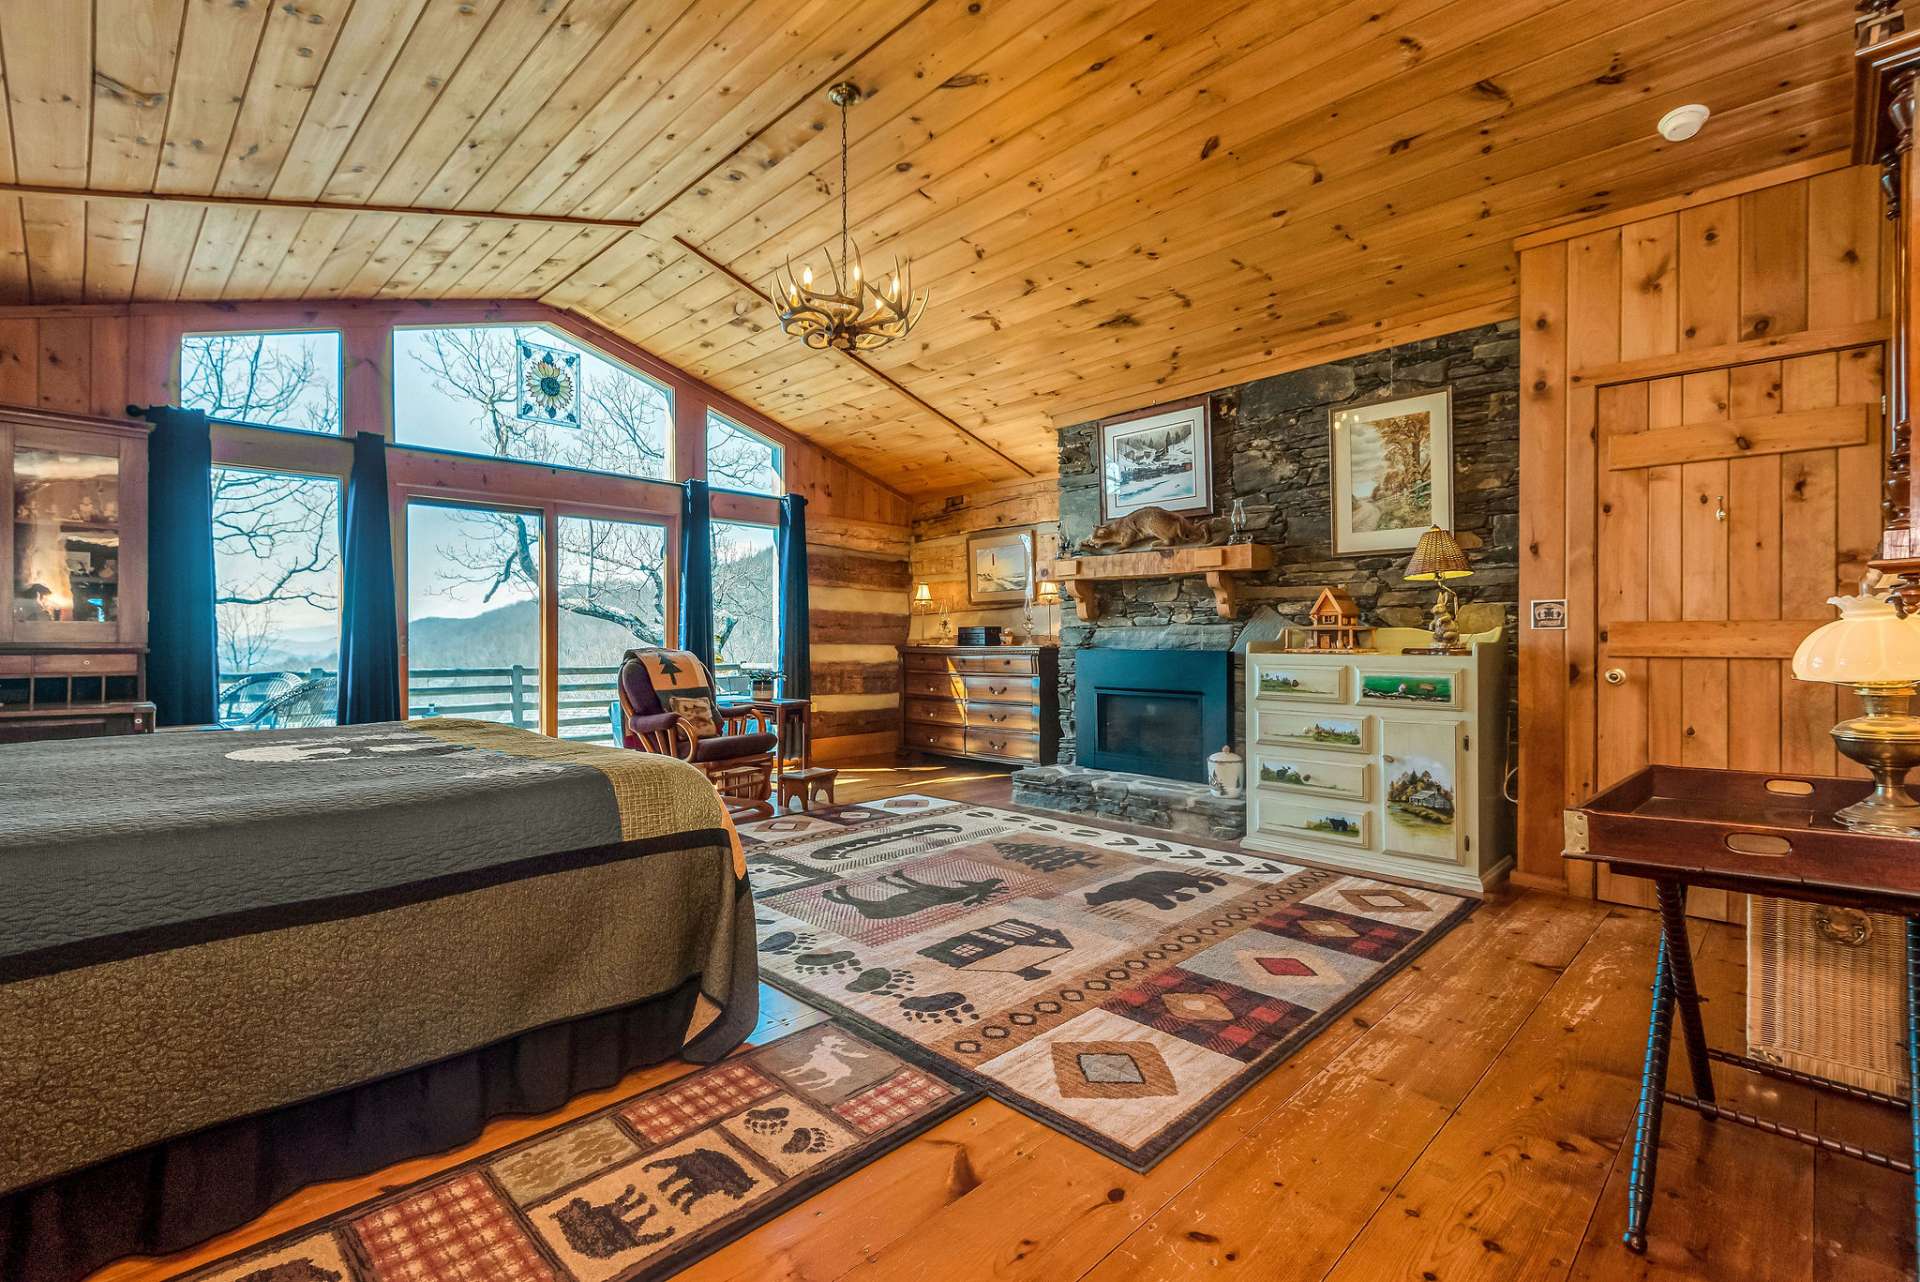 Enjoy the views and star gazing while snuggled up in bed with the gas fireplace glowing.